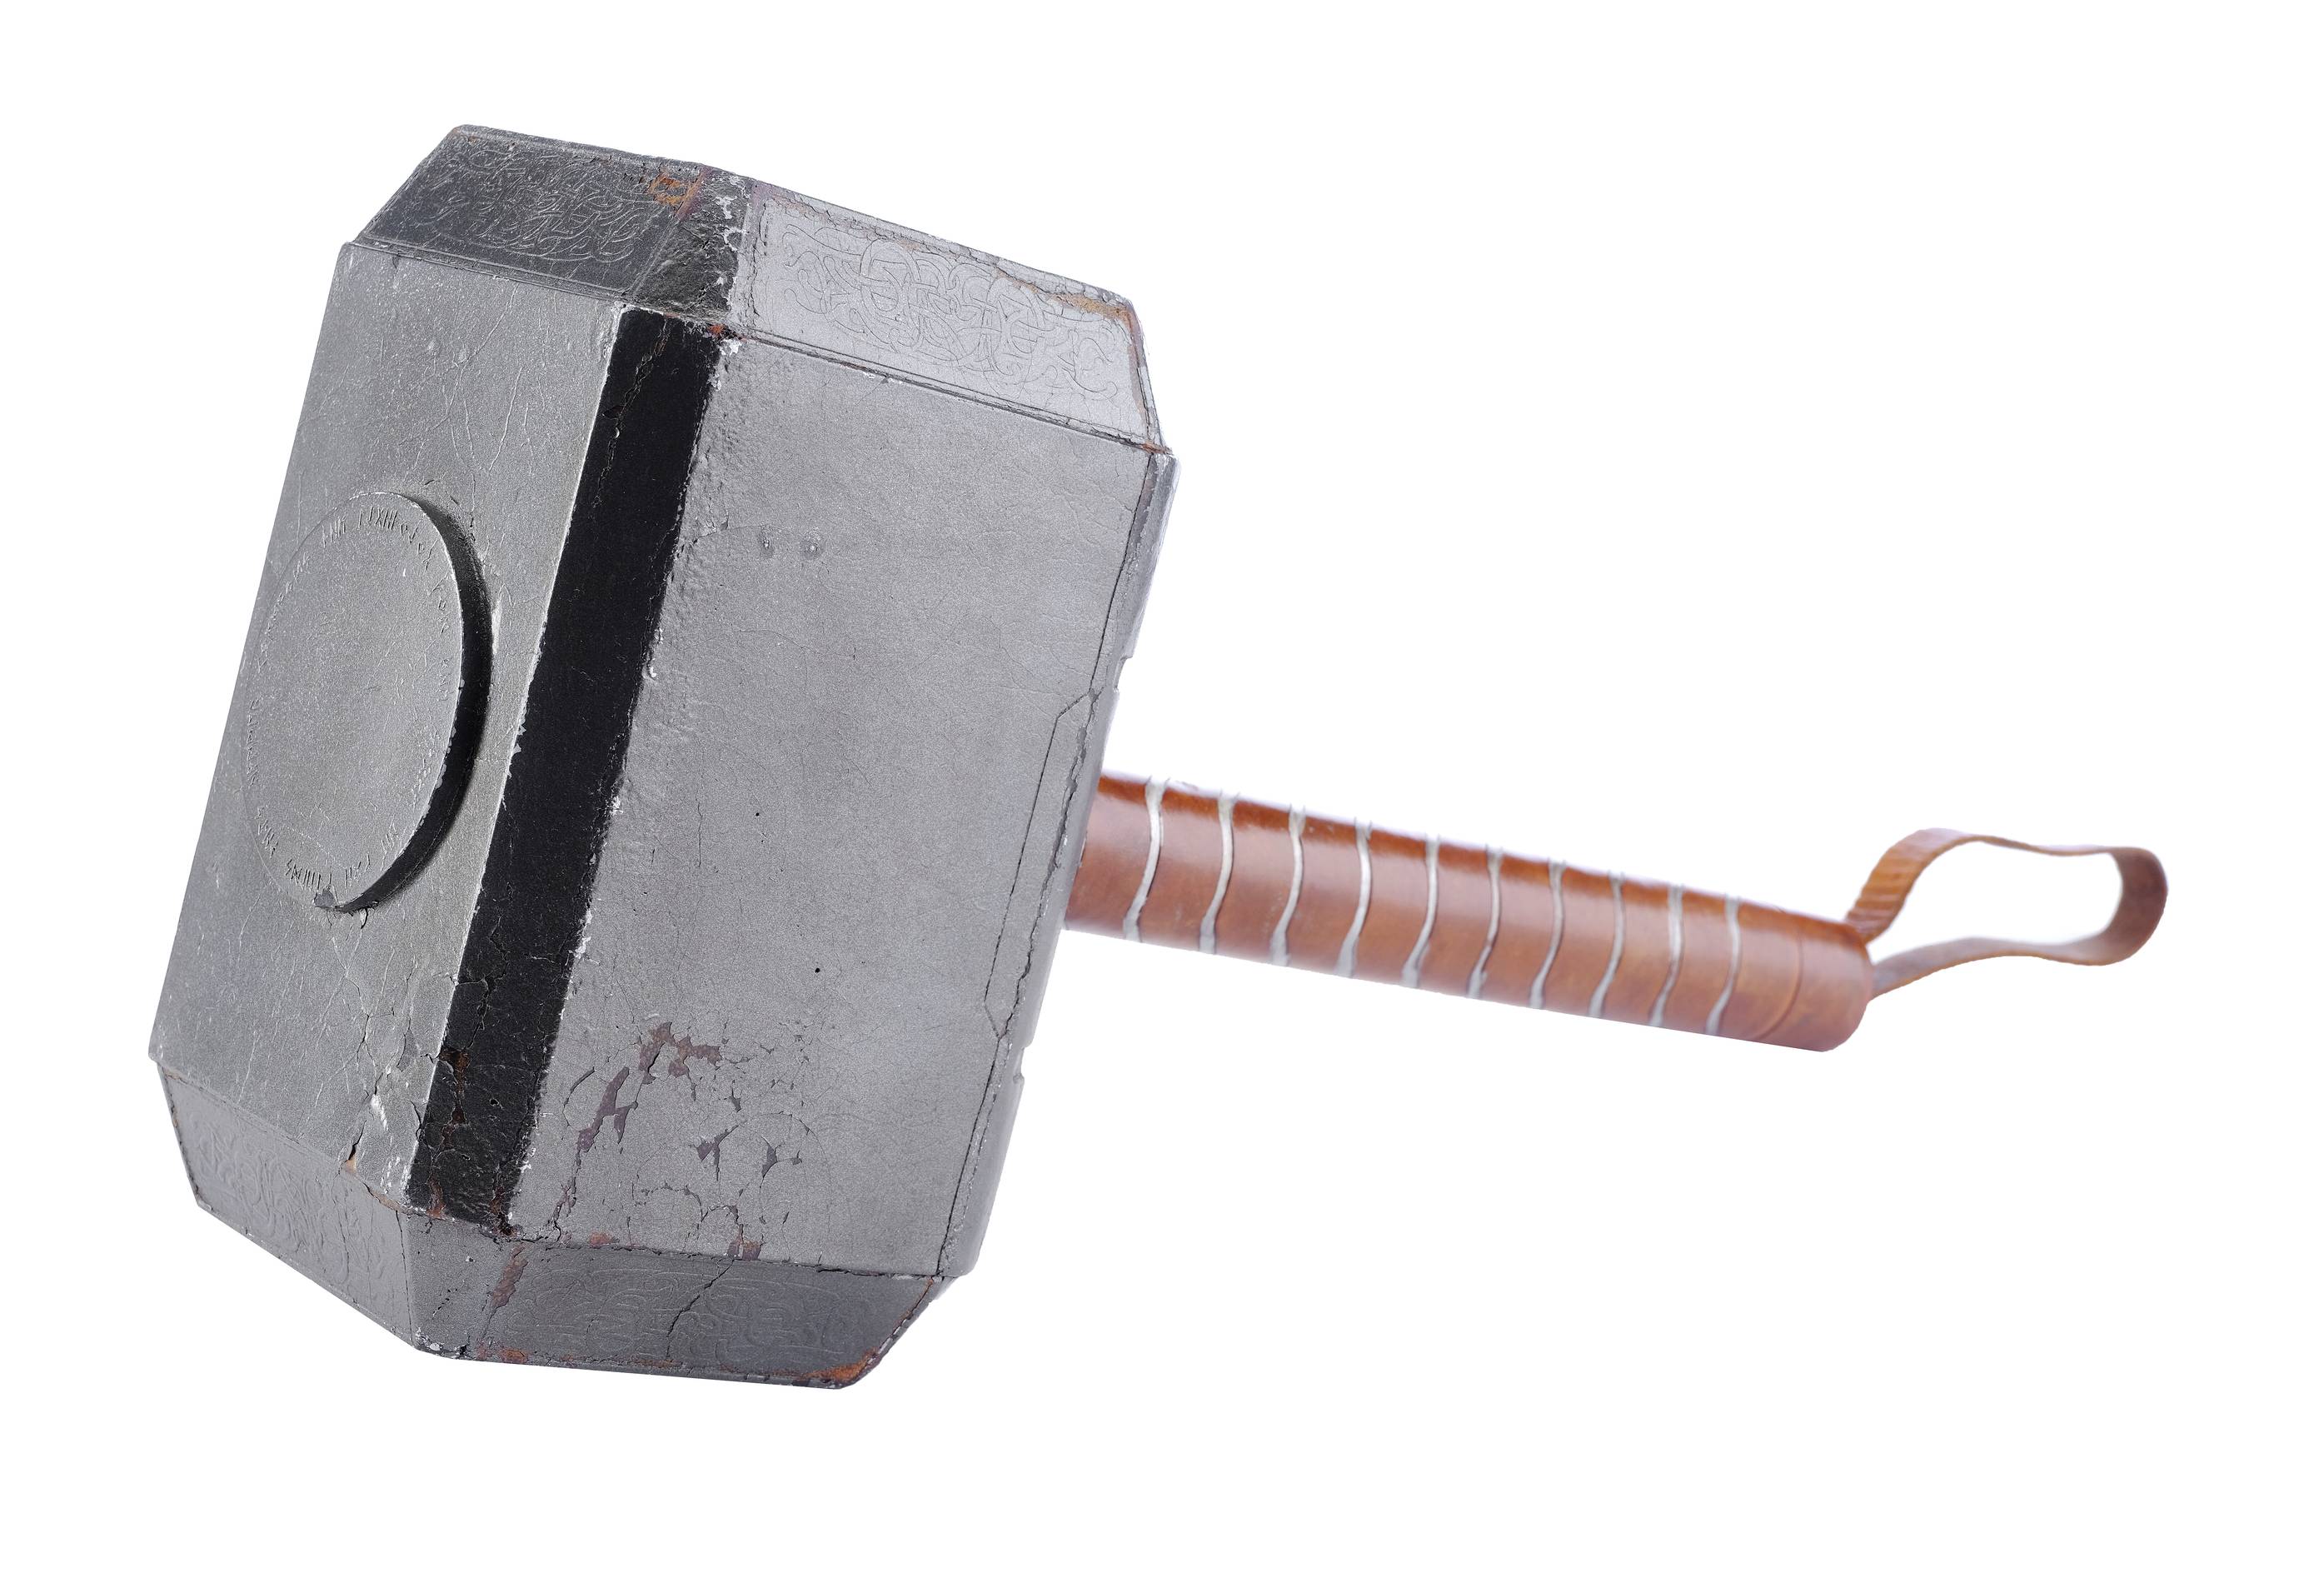 thor's hammer from 2011 film